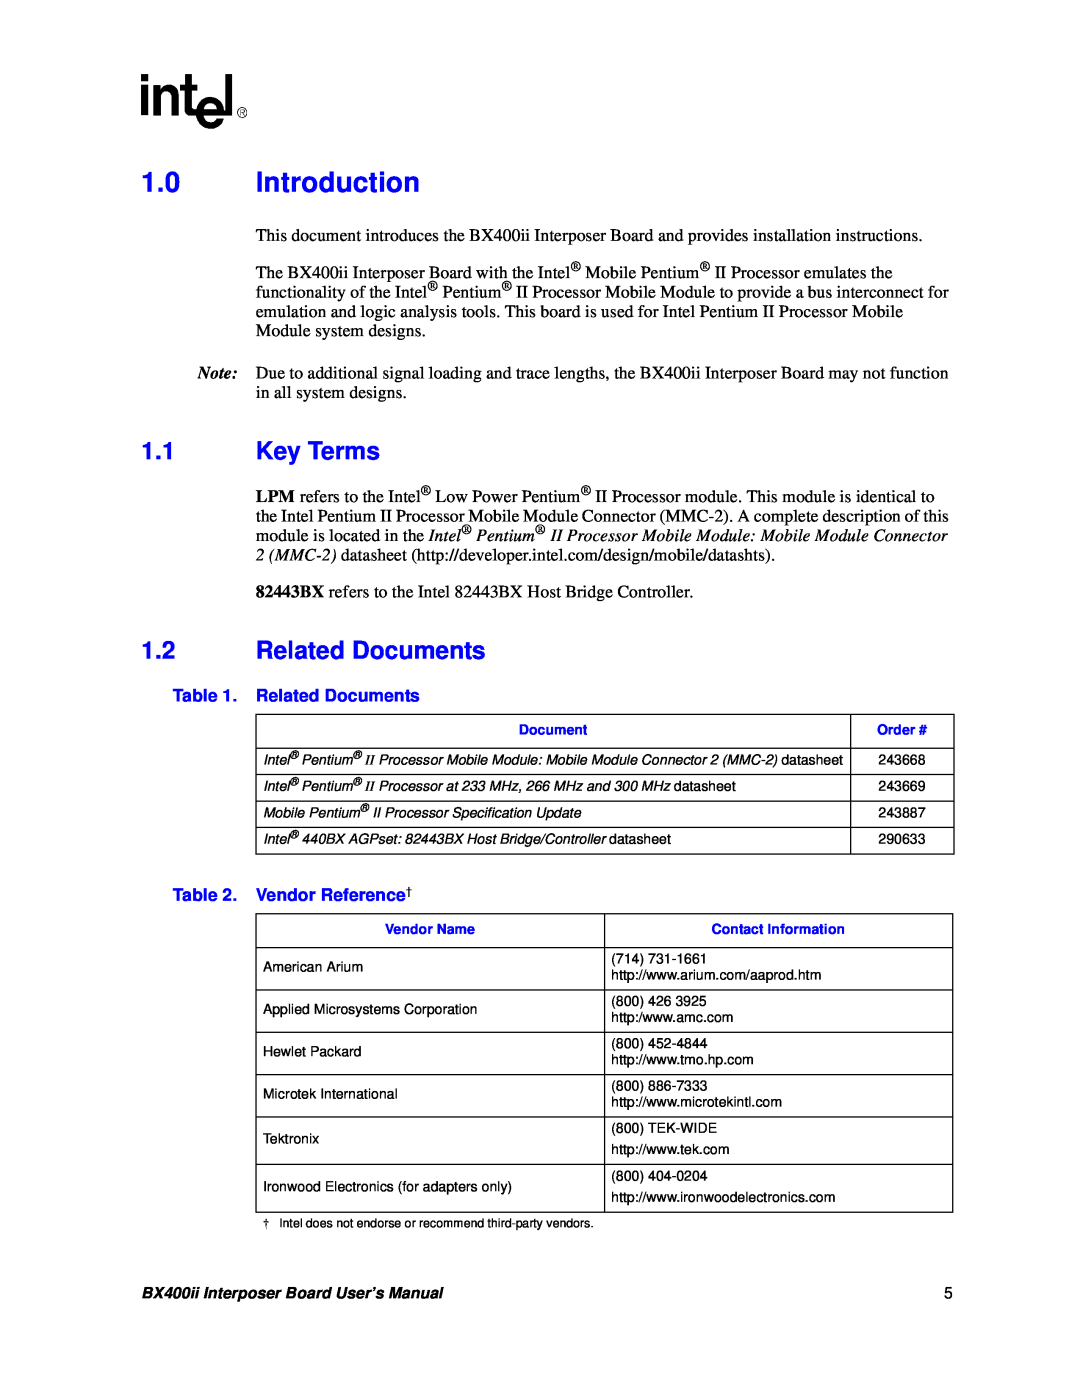 Intel BX400II user manual 1.0Introduction, 1.1Key Terms, 1.2Related Documents, Vendor Reference† 